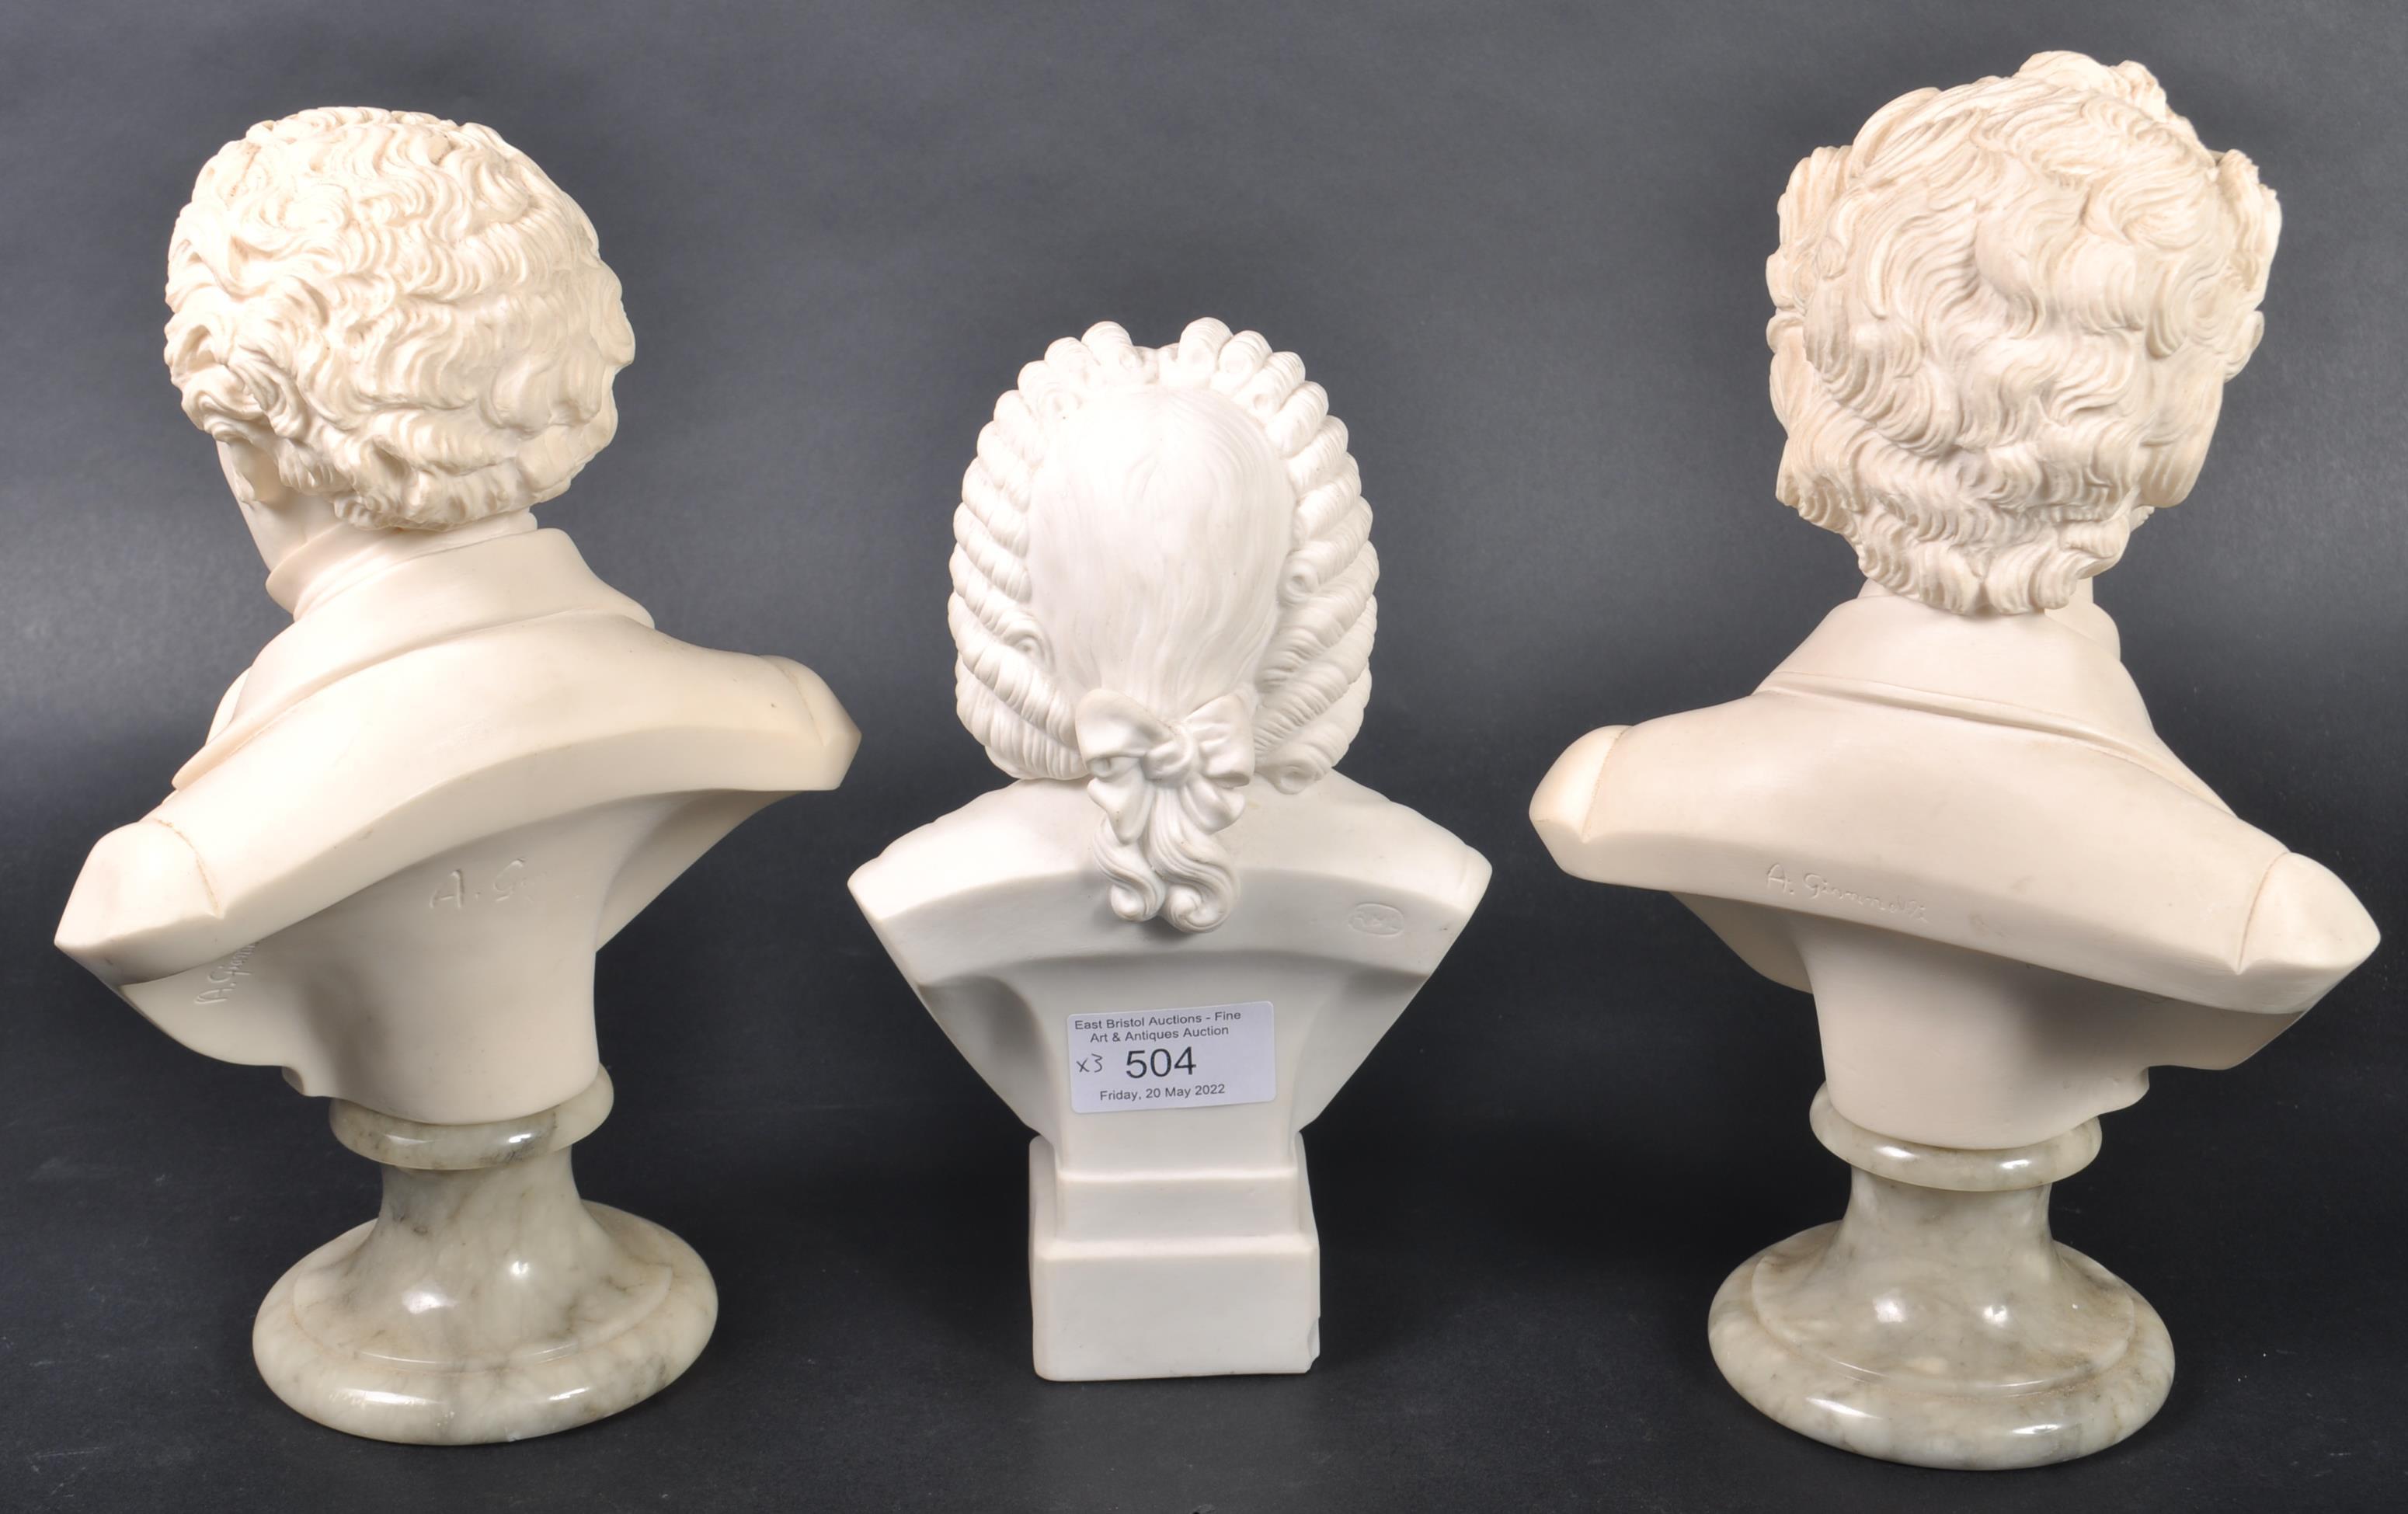 GROUP OF THREE BUSTS DEPICTING FAMOUS COMPOSERS - Image 6 of 9